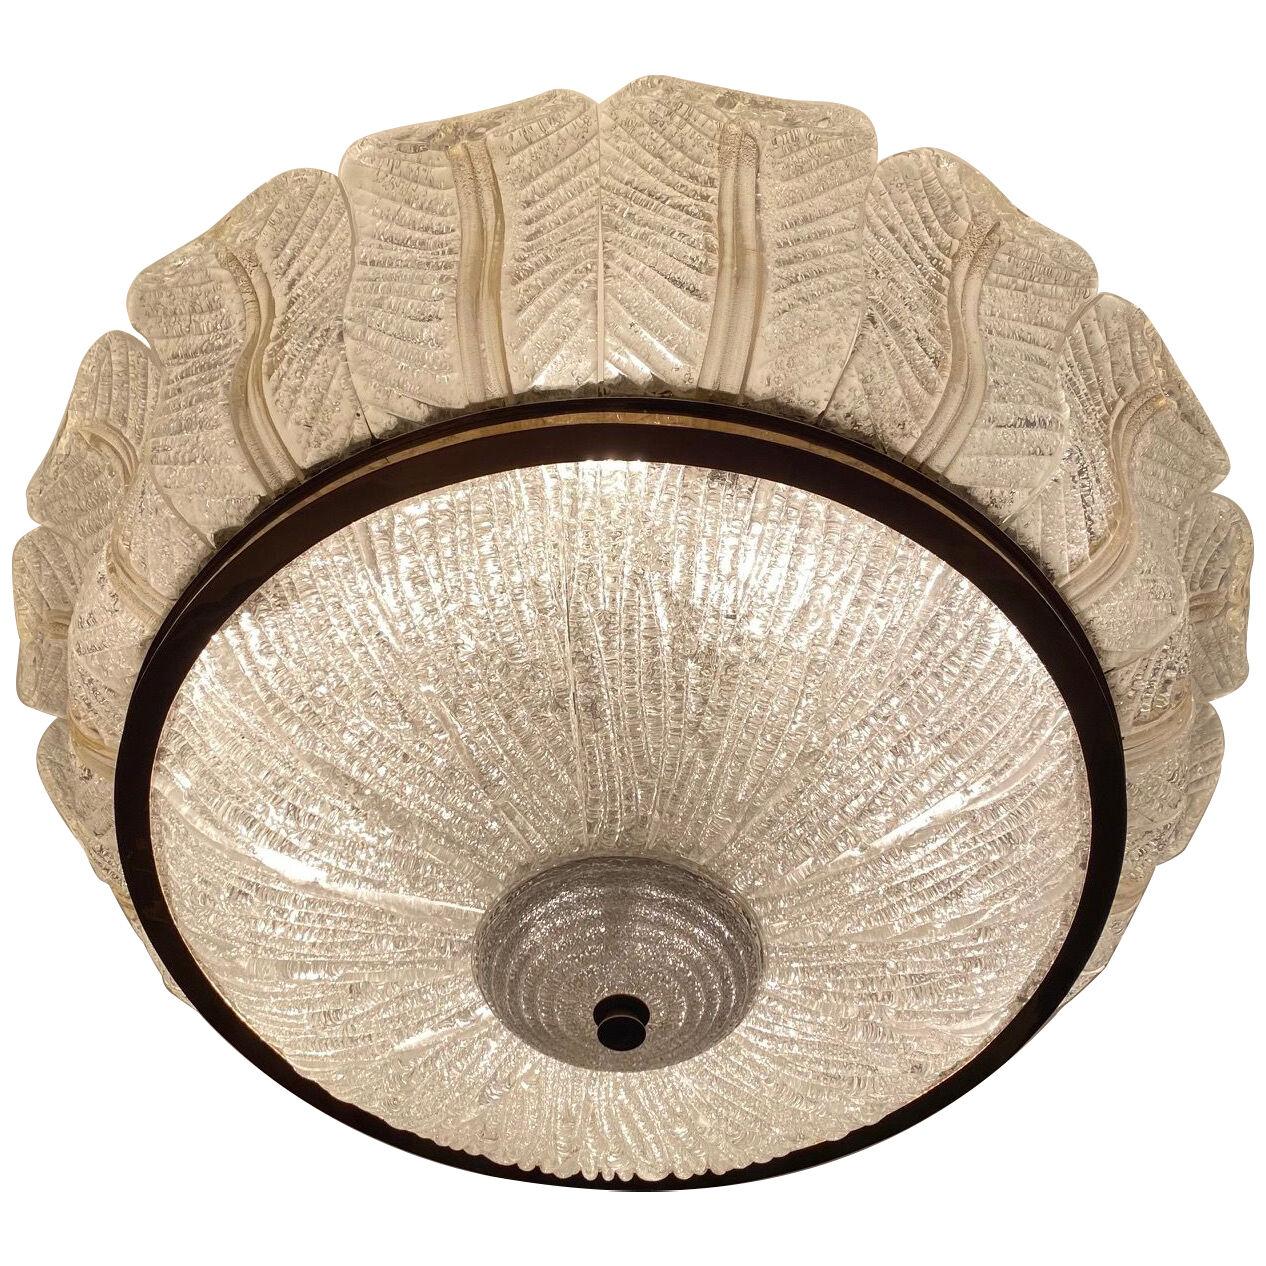 A large vintage ceiling light by Barovier